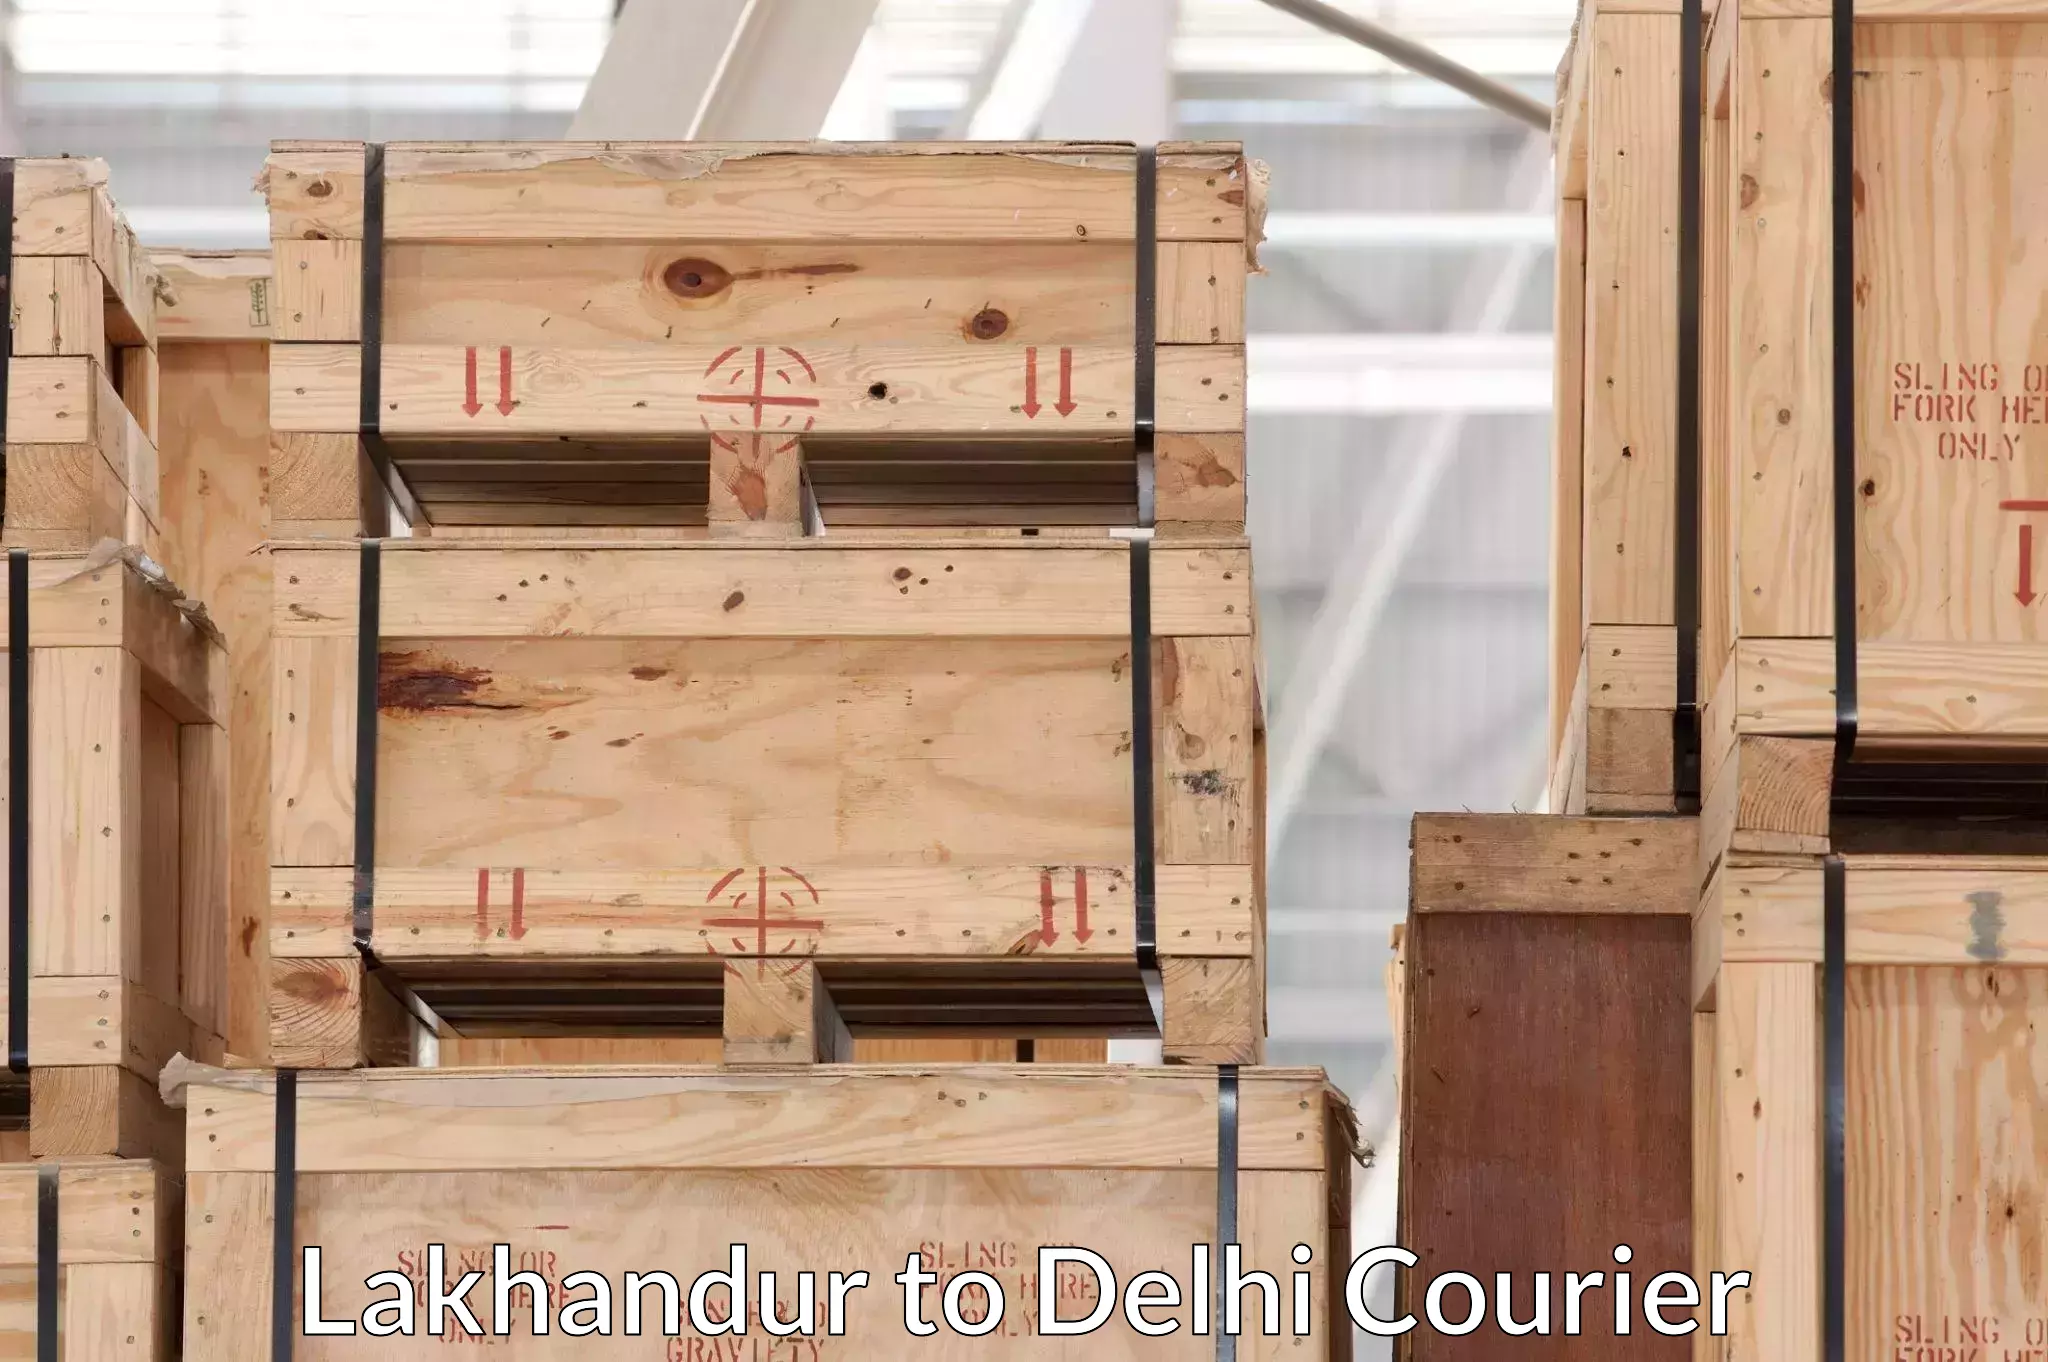 Budget-friendly movers in Lakhandur to Sansad Marg